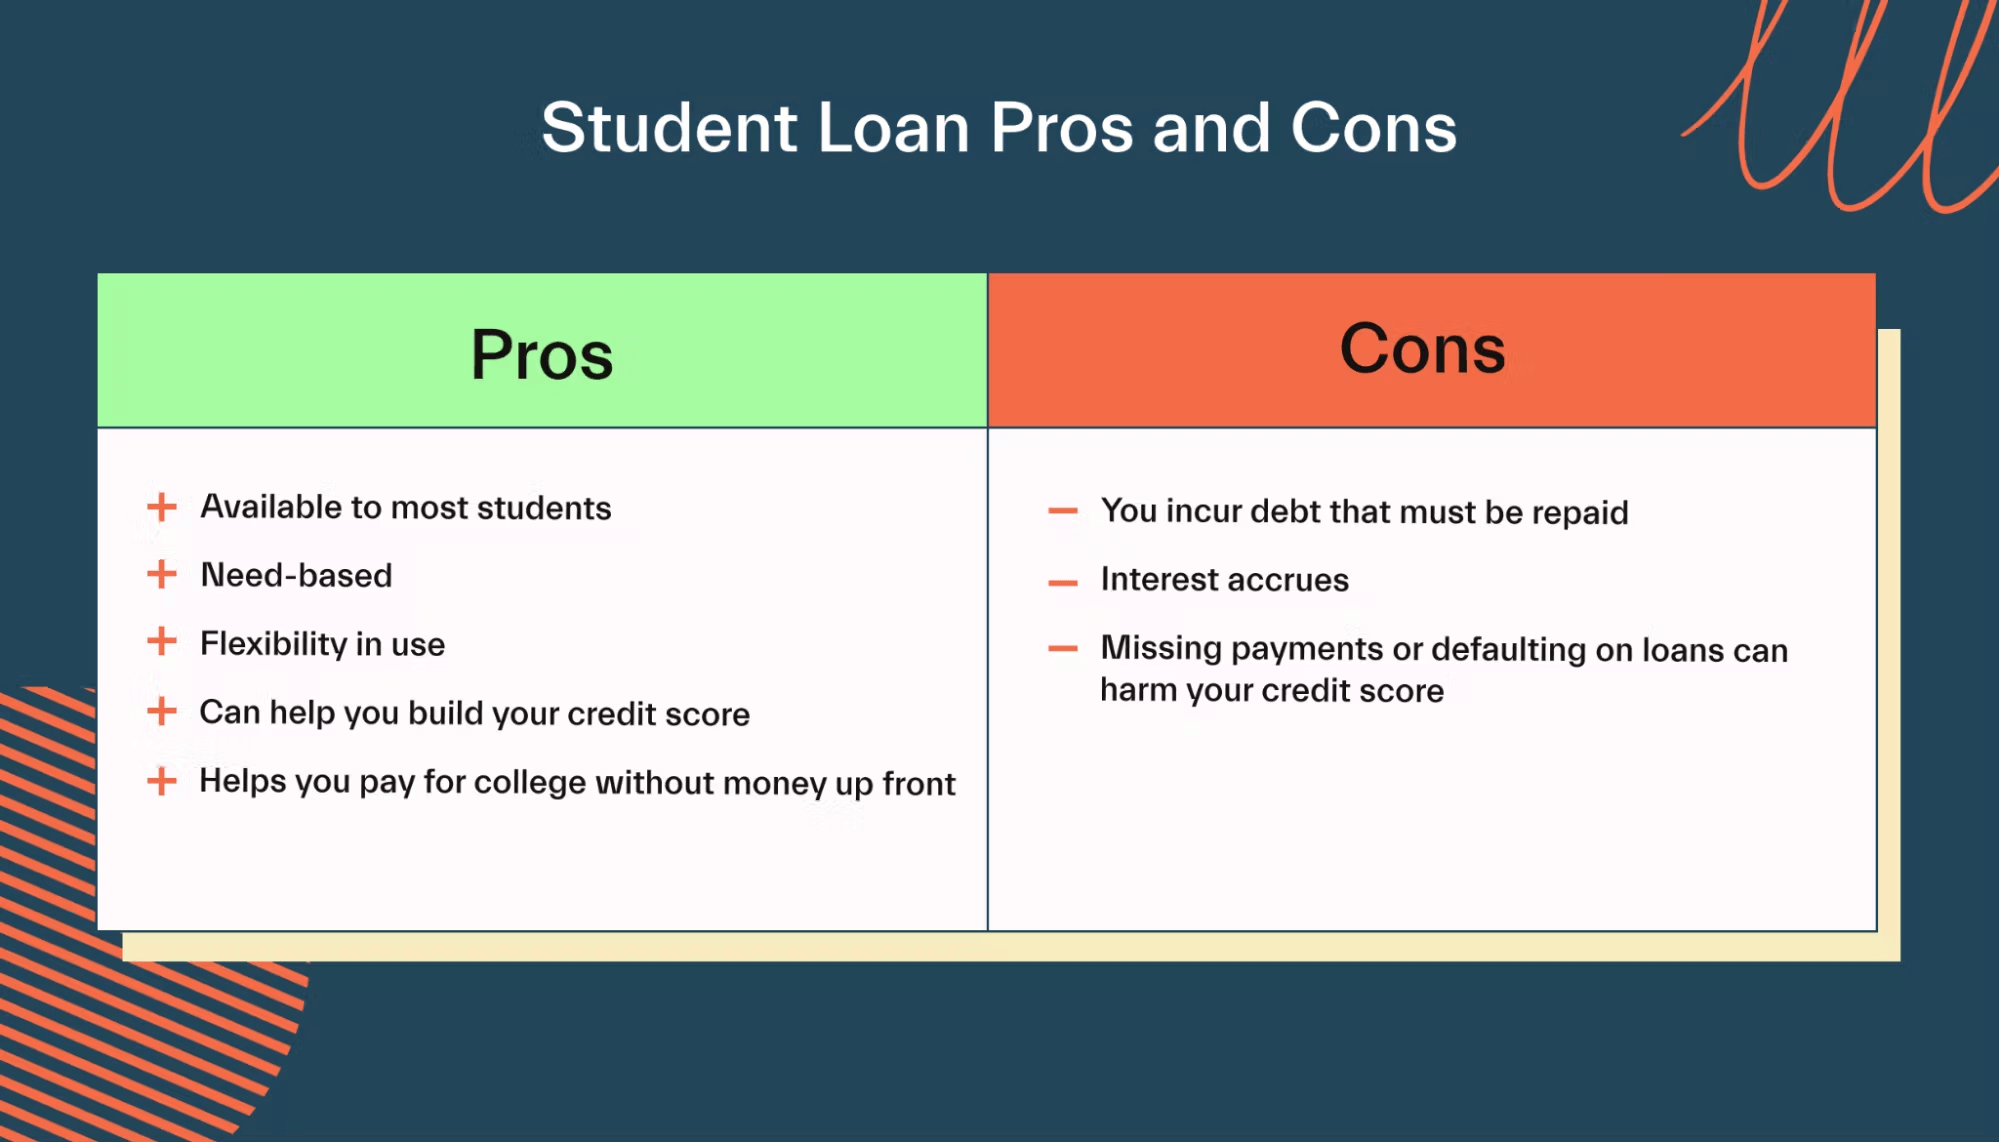 Student loans pros and cons